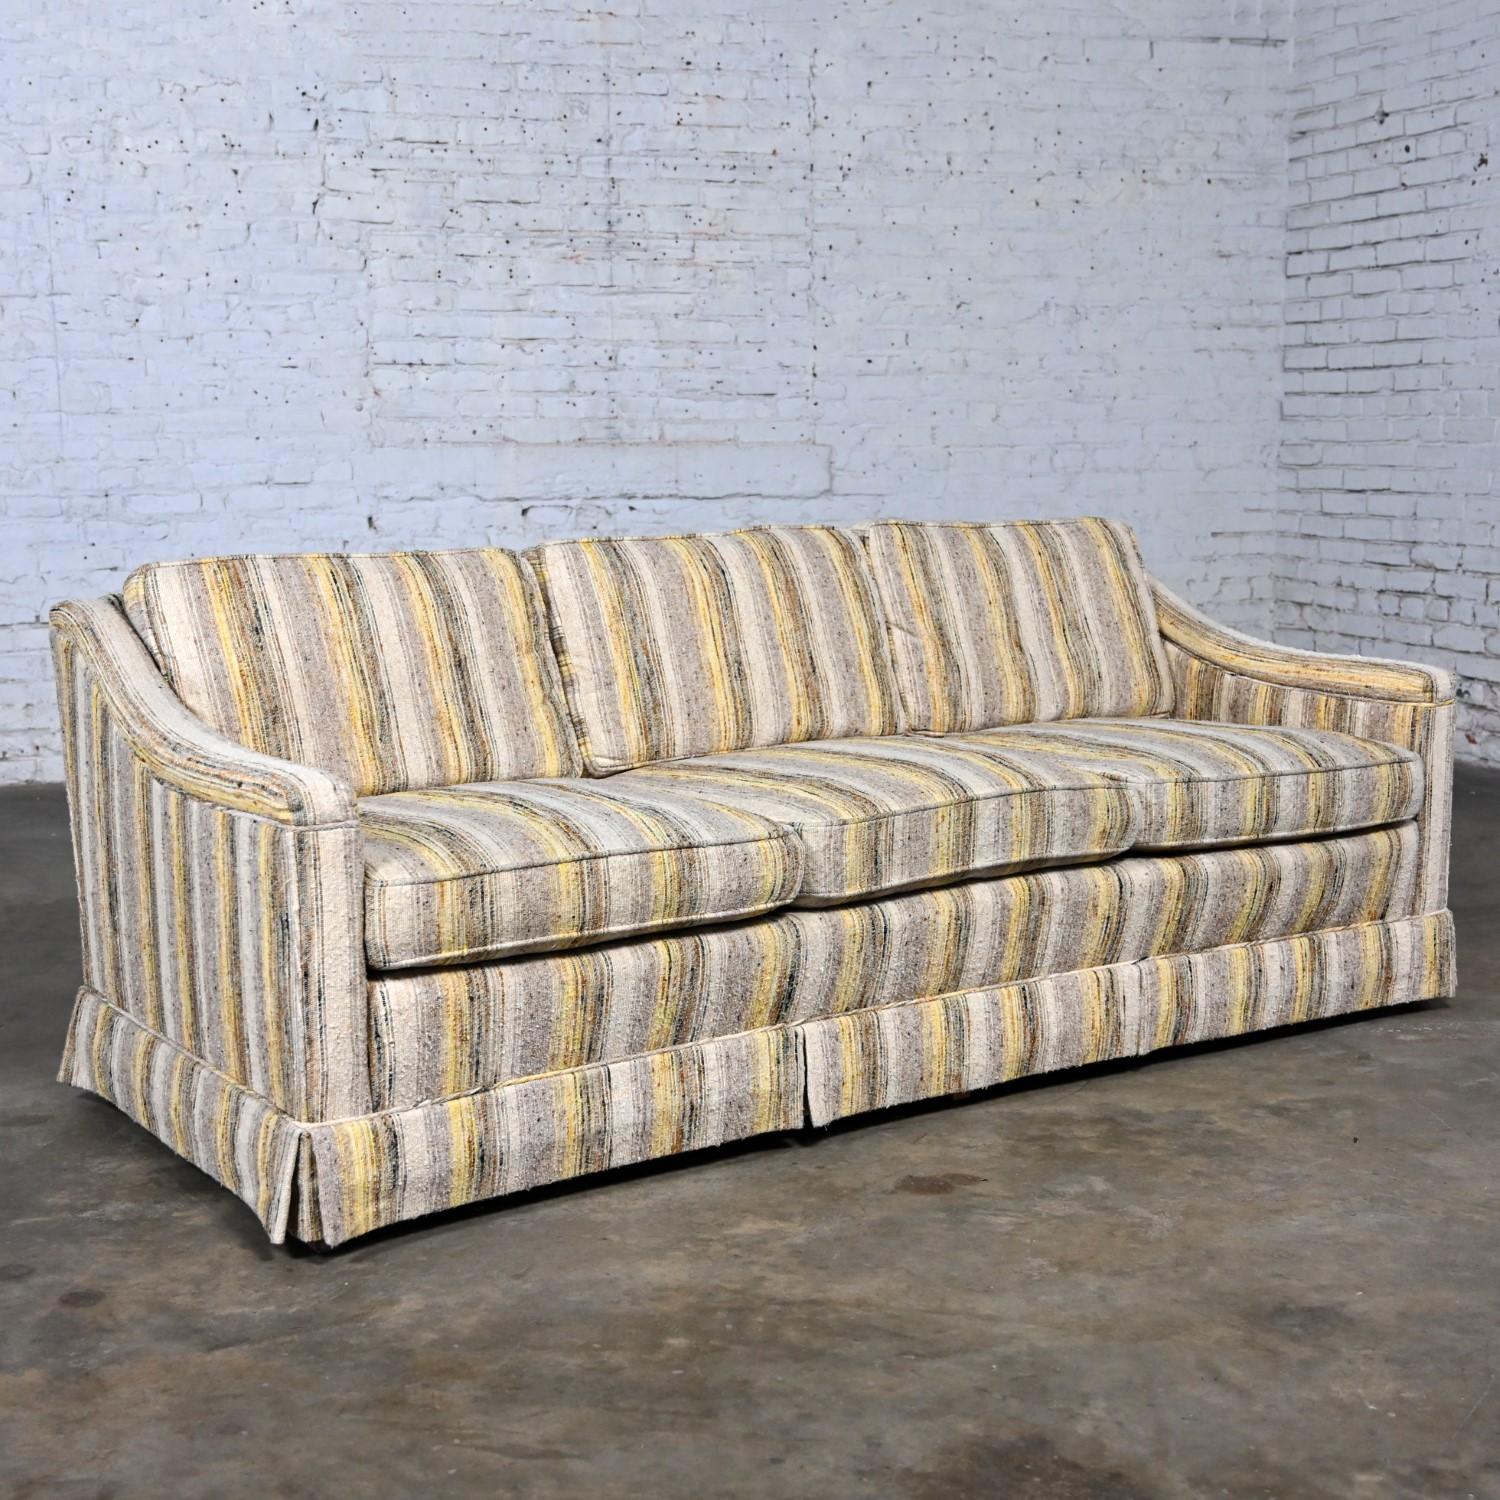 Mid-Century Modern Henredon Sofa Modified Lawson Style Yellow & Beige Striped For Sale 12